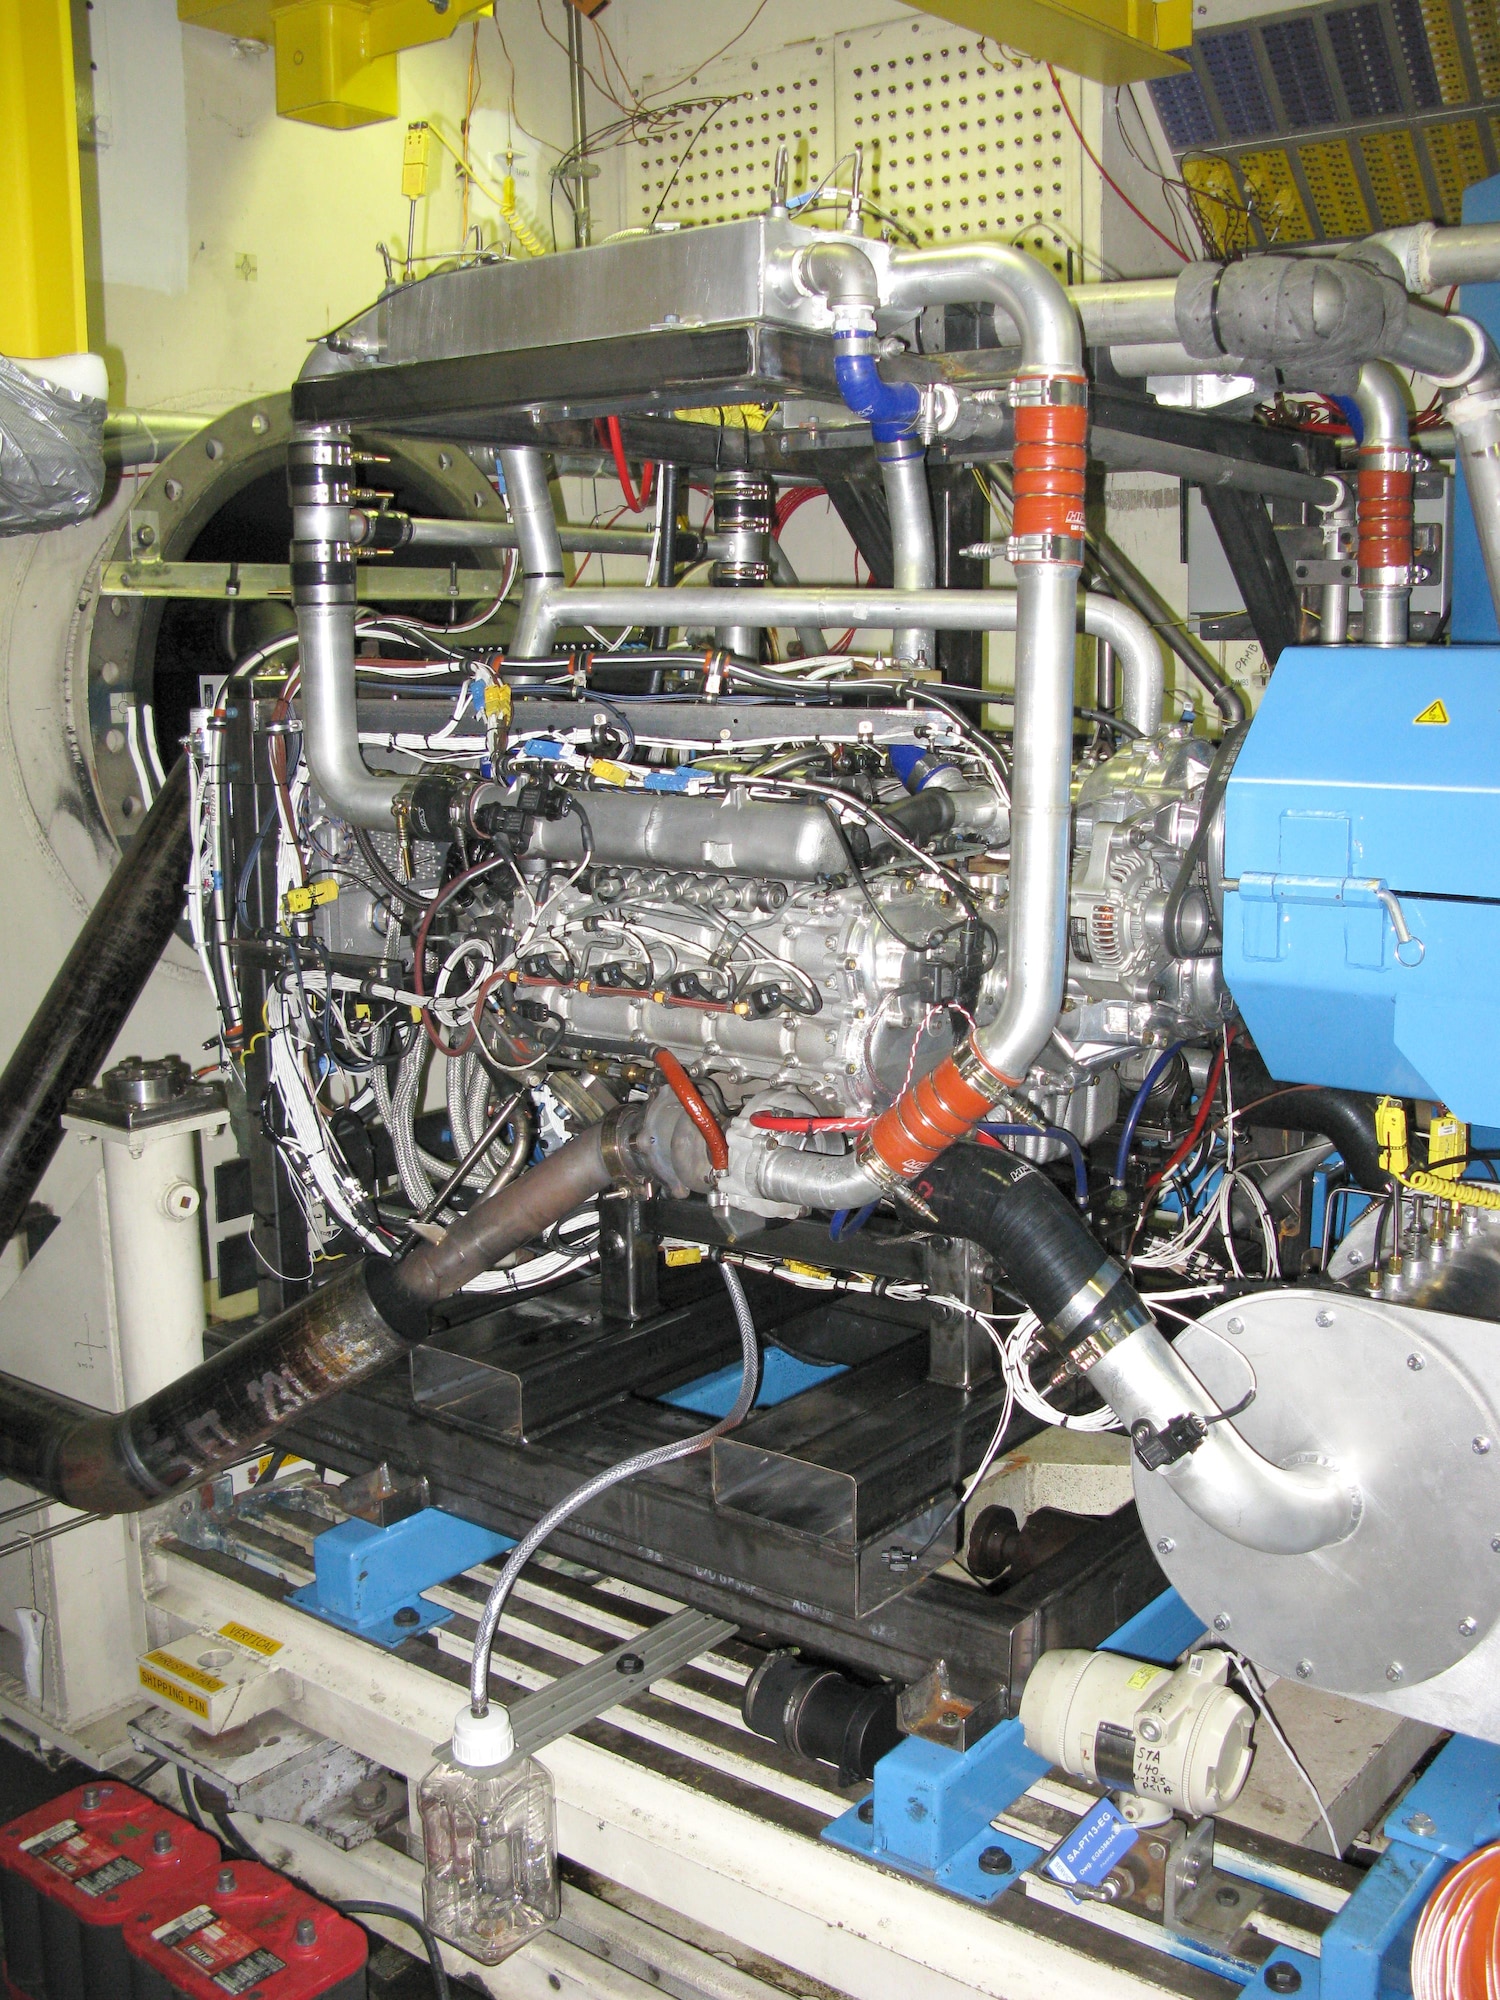 High Efficiency Innovative Aviation Diesel Engine in test cell